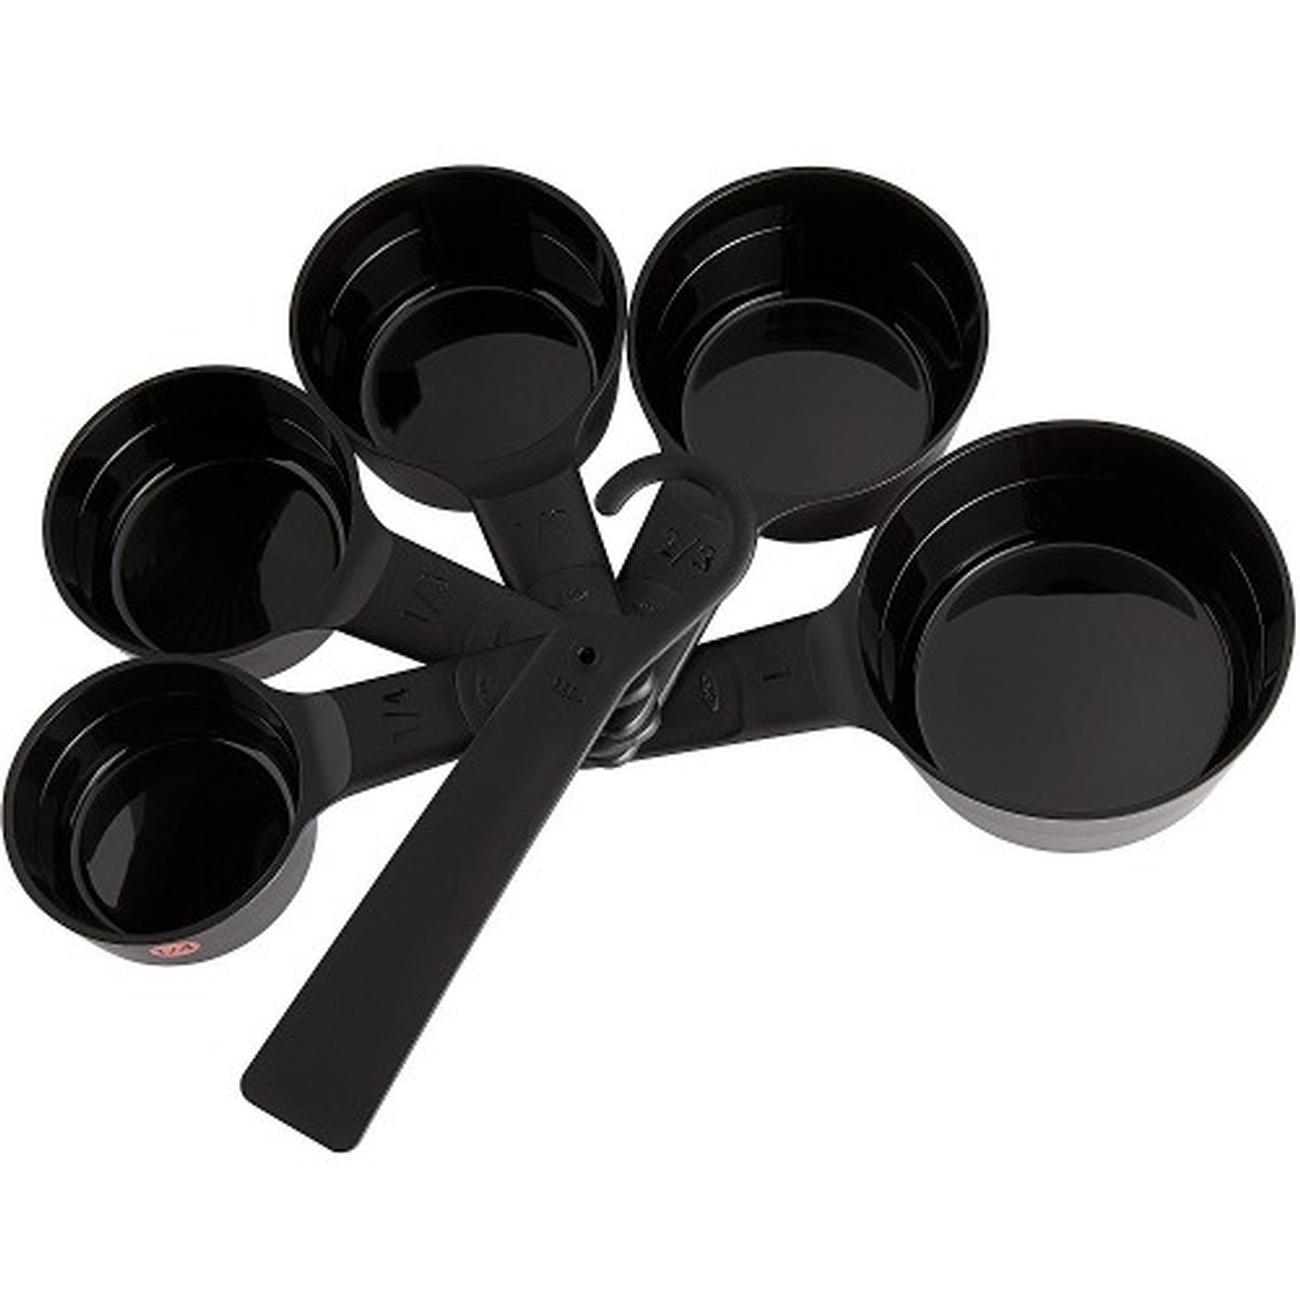 https://www.thekitchenwhisk.ie/contentfiles/productImages/Large/MeasuringCups6pc-Black-3.jpg